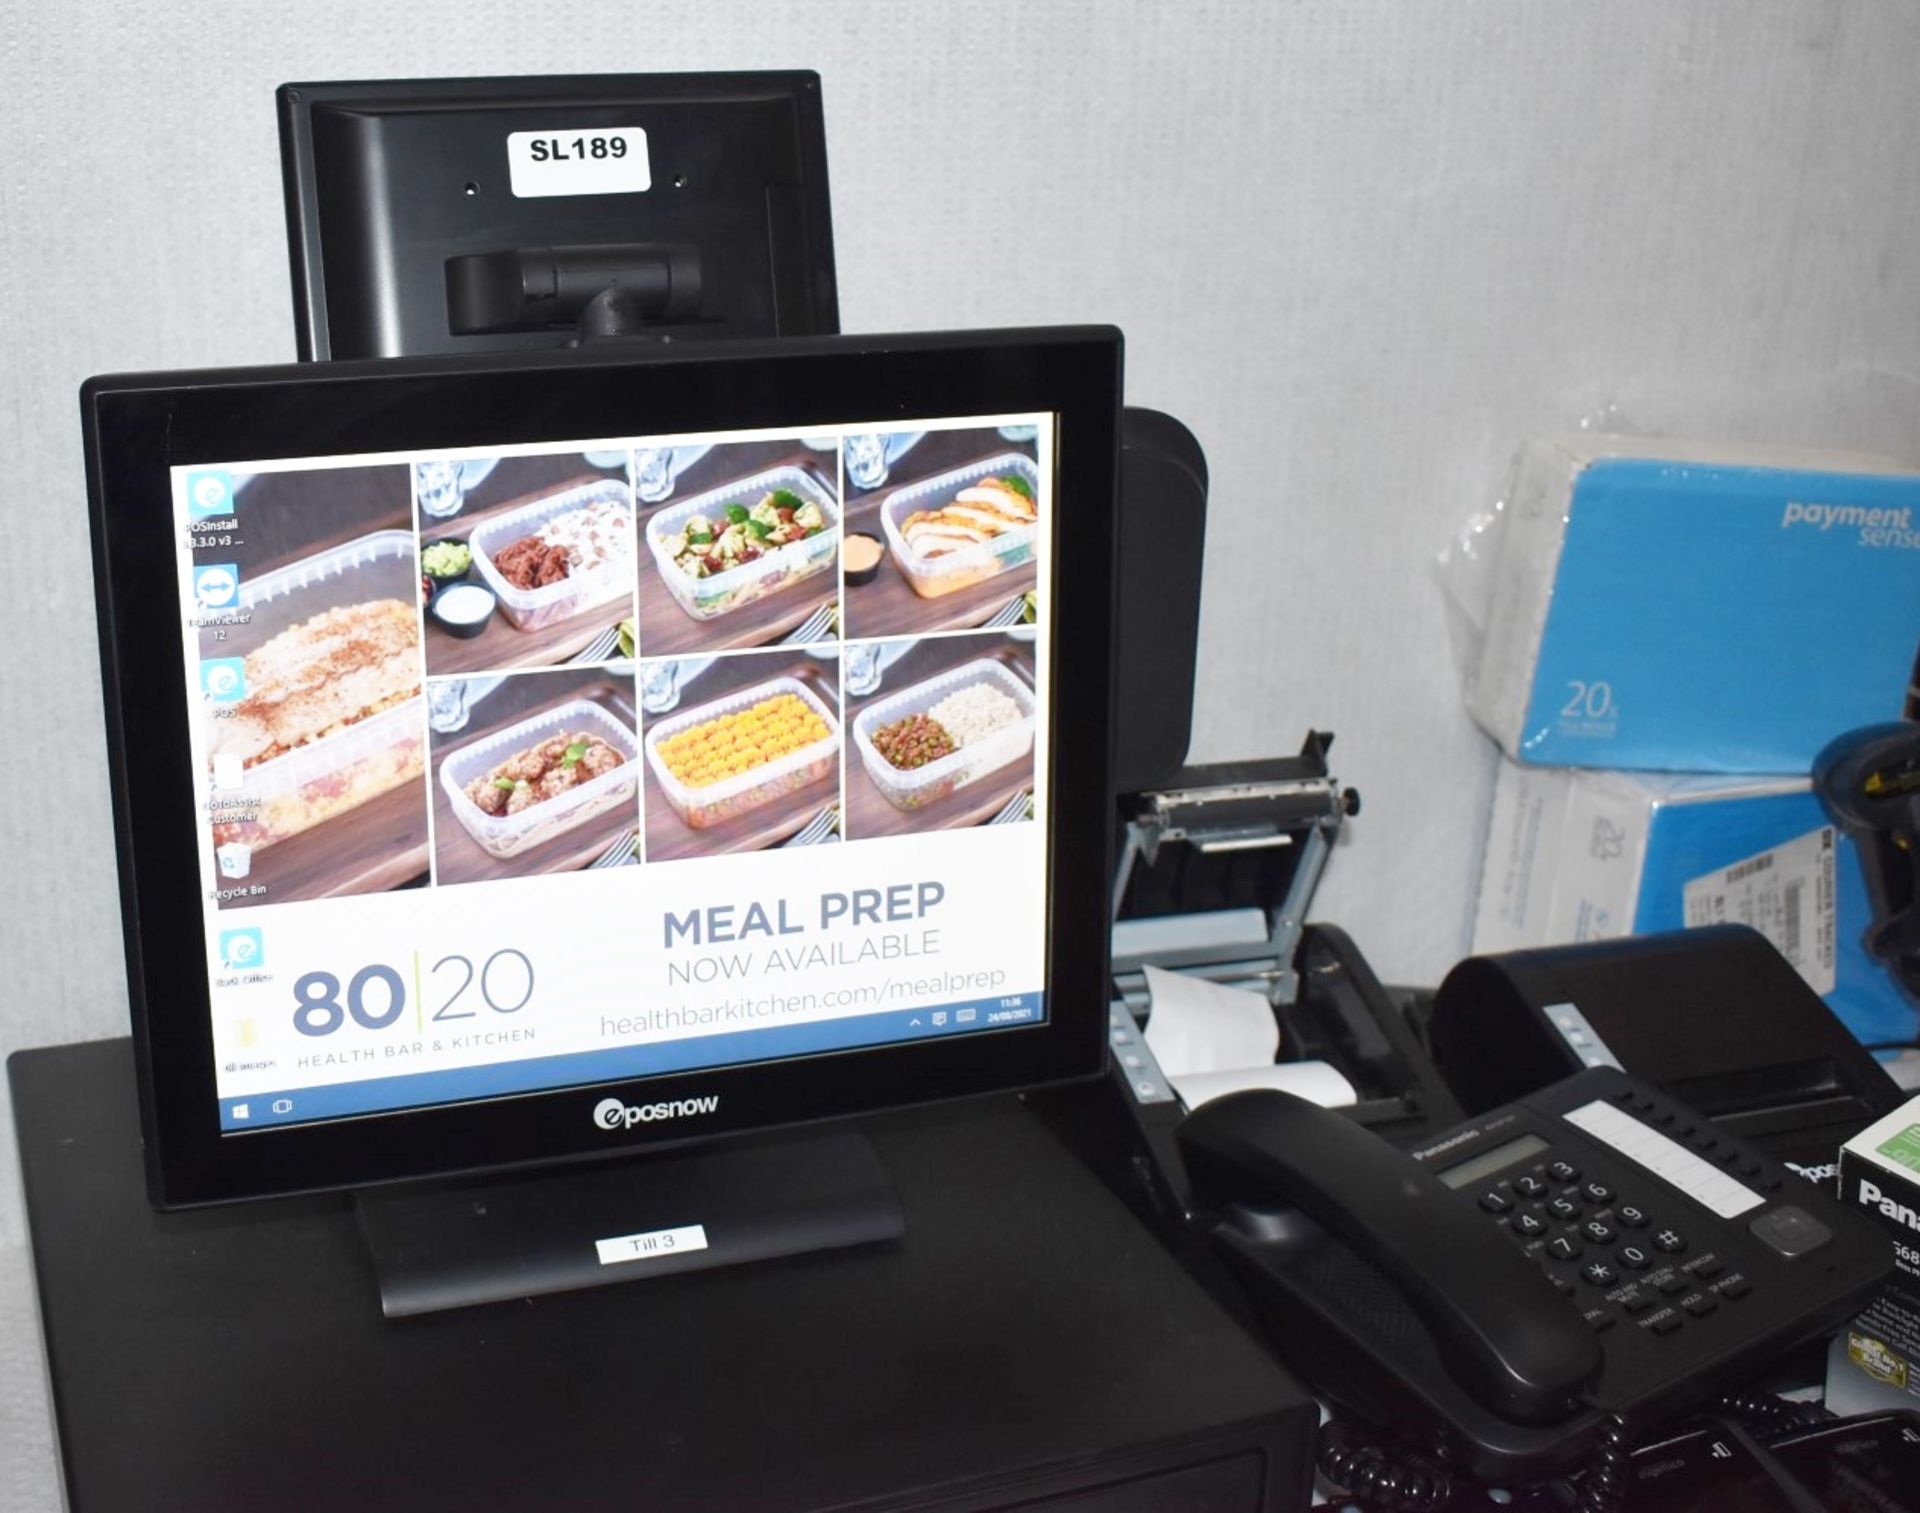 1 x Epos Now Pro C15 15.1" All in One POS Terminal System With Windows 10, Touchscreen and - Image 19 of 29